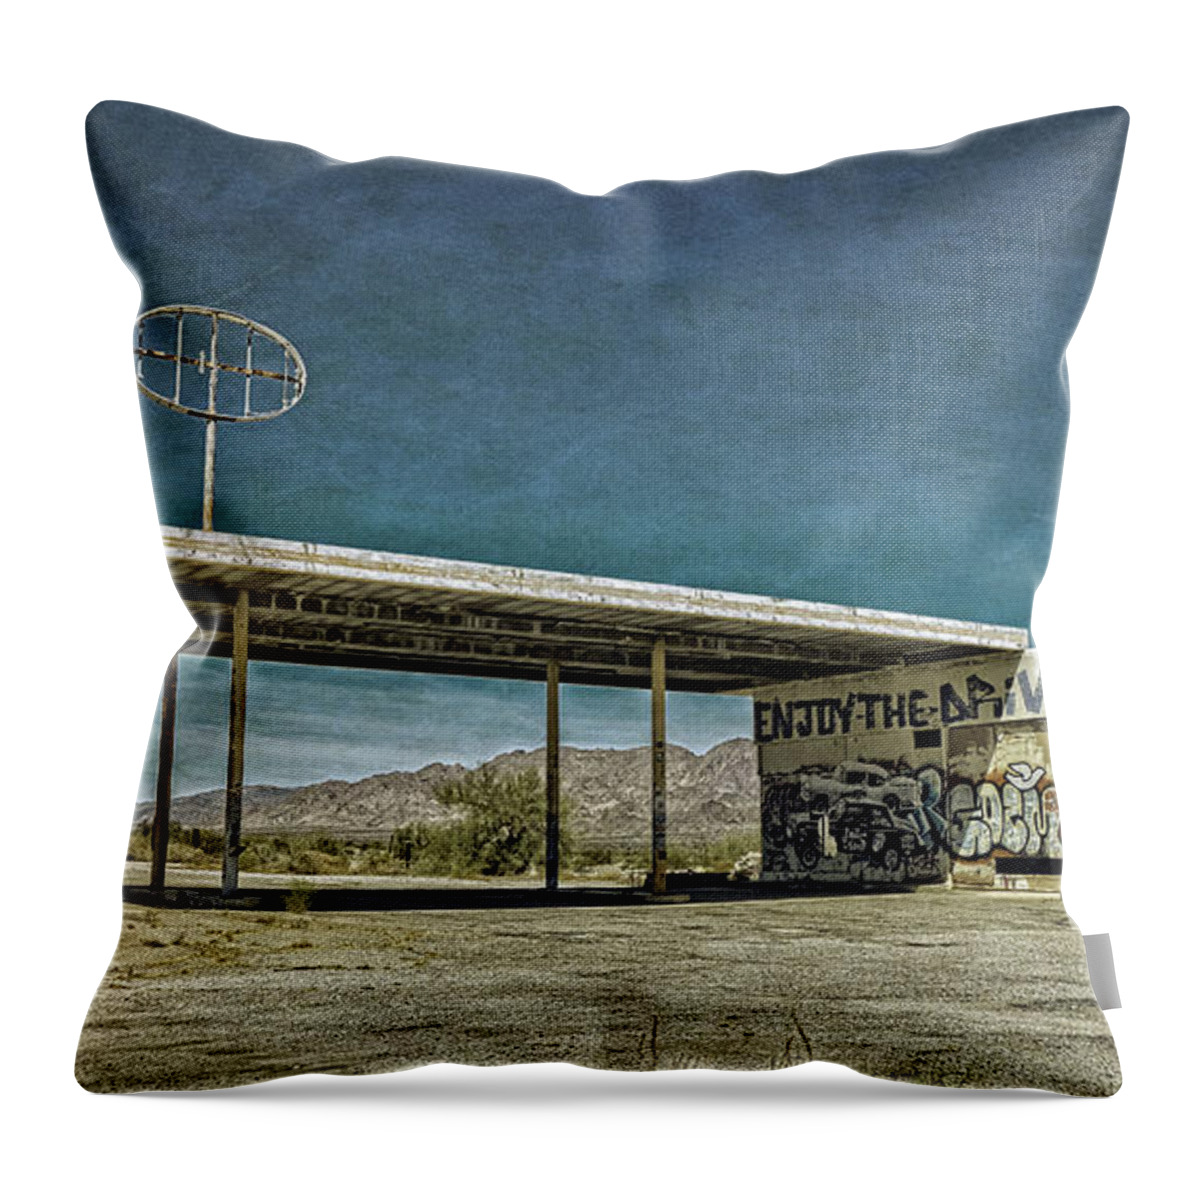 Desert Center Throw Pillow featuring the photograph Off Highway 10 by Sandra Selle Rodriguez